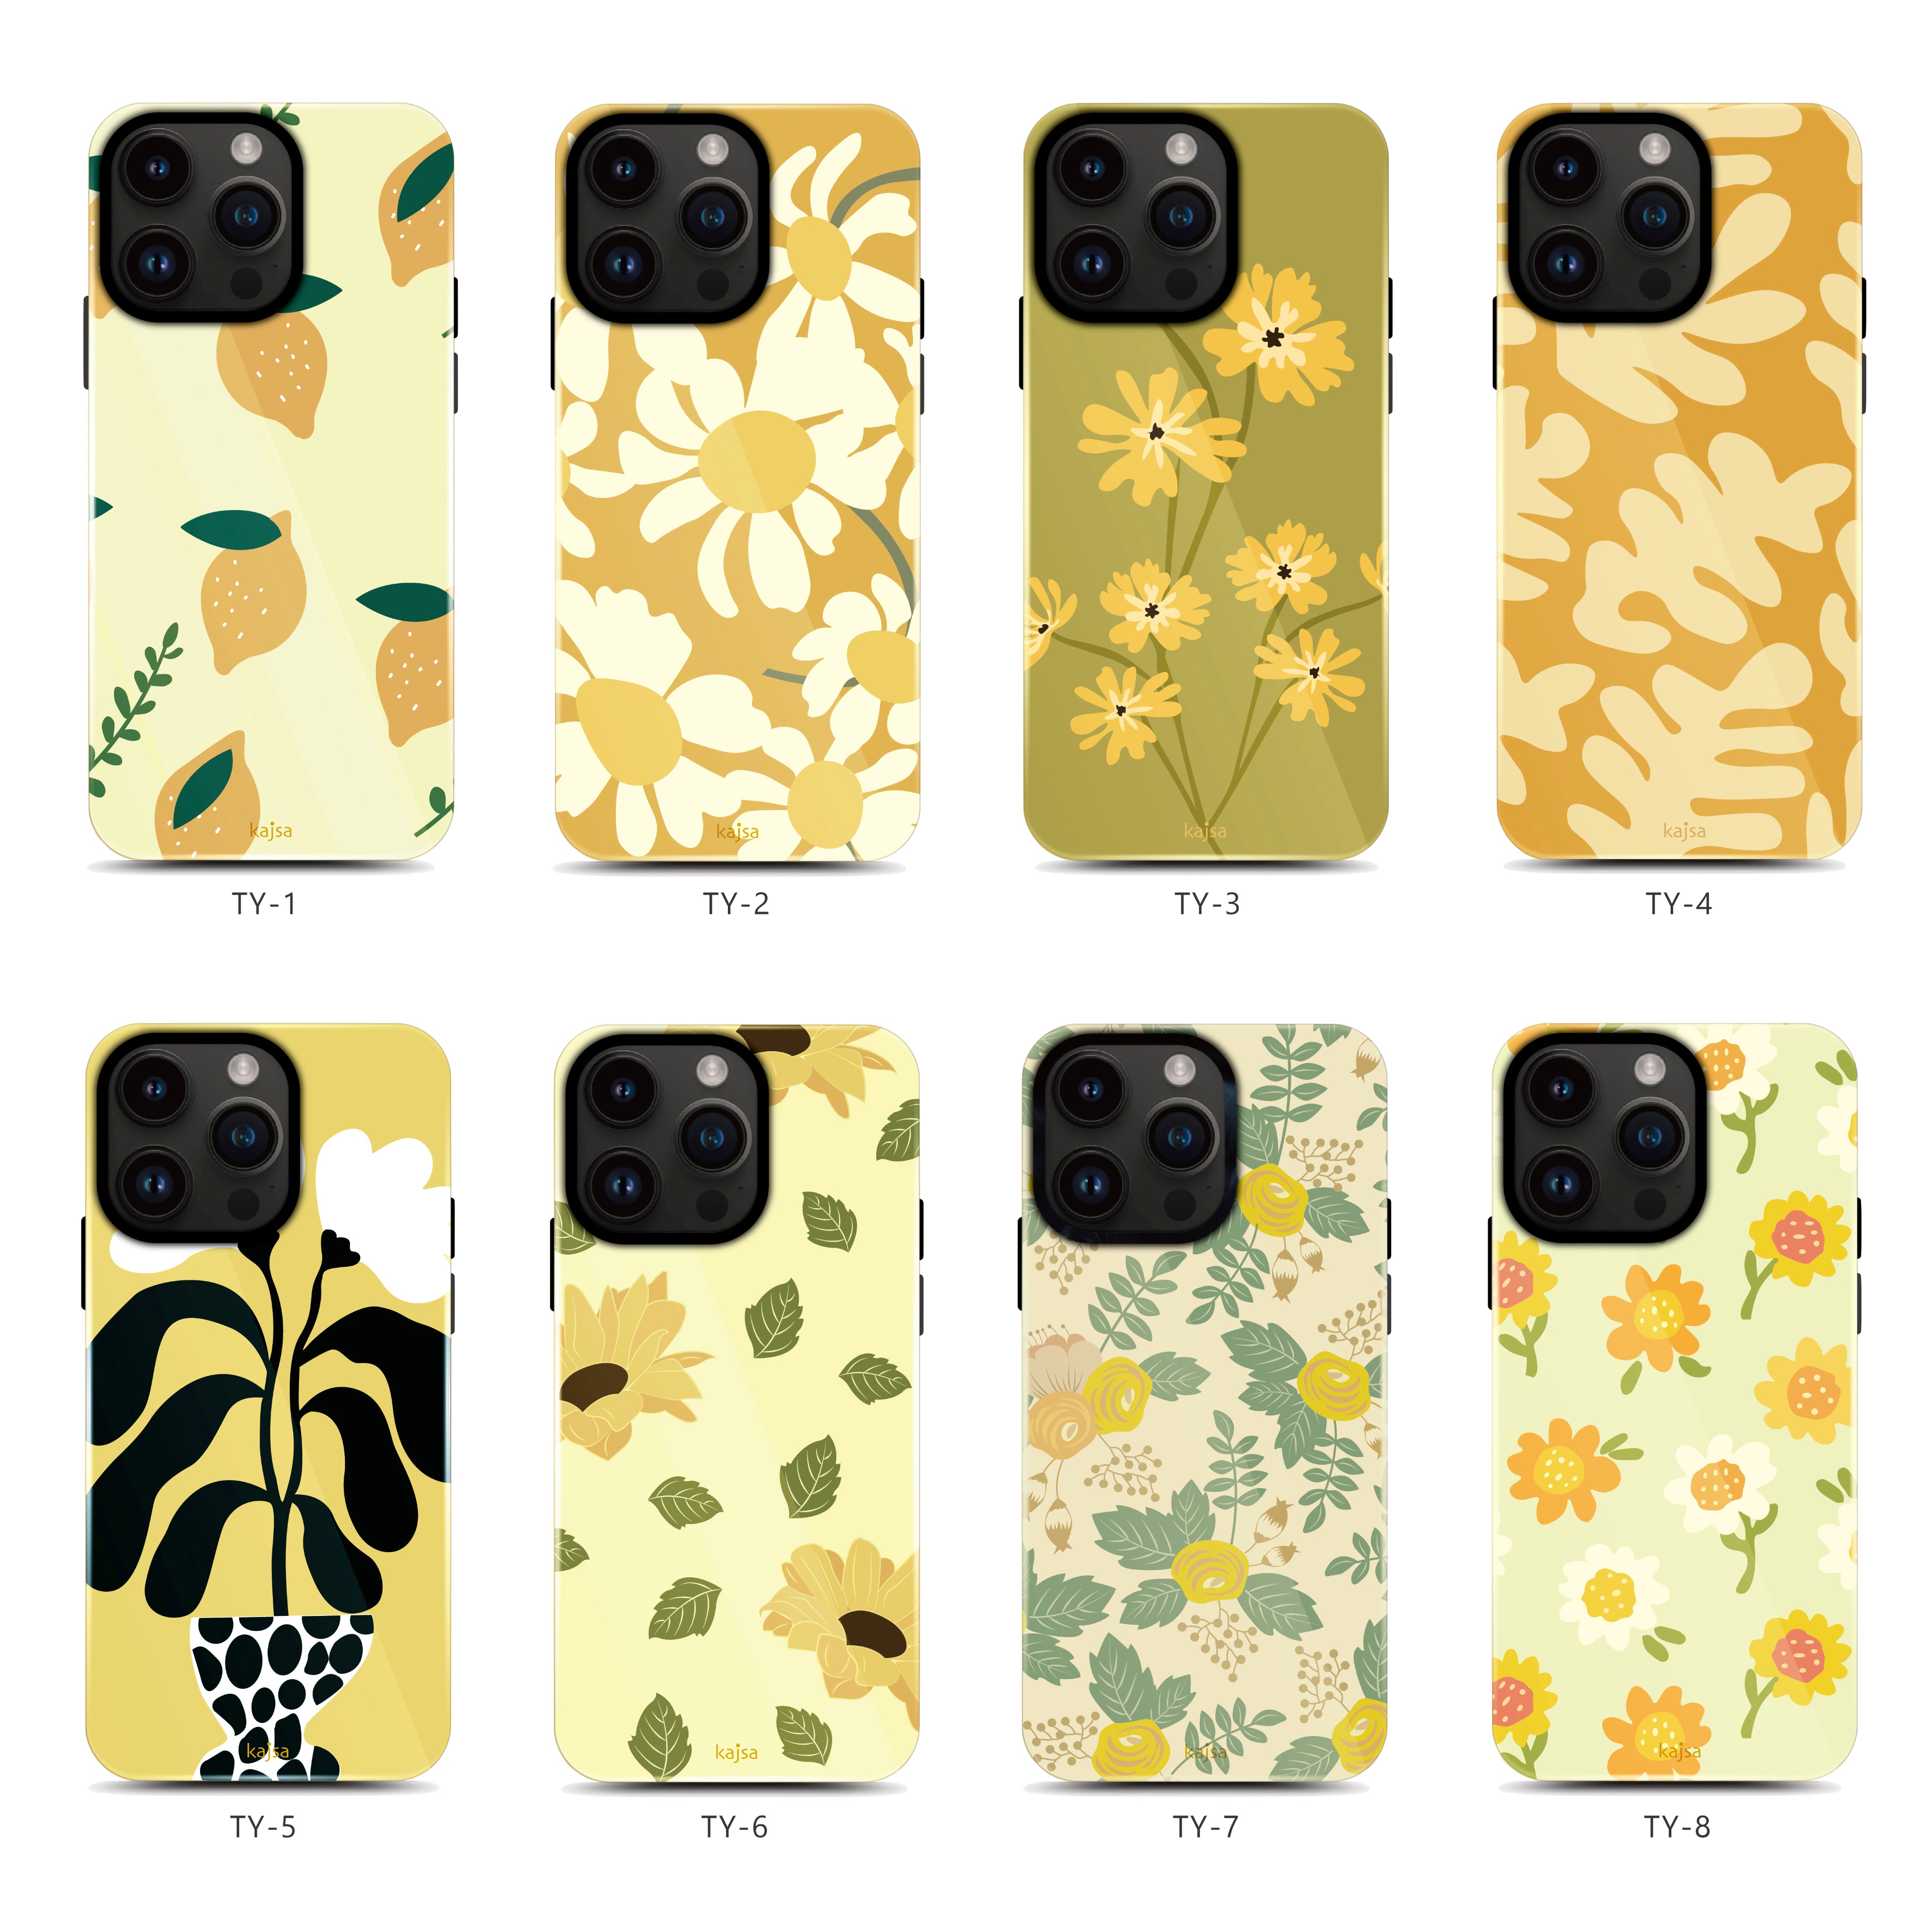 Floral Collection - Tropical Back Base for iPhone 14 (TY5)-Phone Case- phone case - phone cases- phone cover- iphone cover- iphone case- iphone cases- leather case- leather cases- DIYCASE - custom case - leather cover - hand strap case - croco pattern case - snake pattern case - carbon fiber phone case - phone case brand - unique phone case - high quality - phone case brand - protective case - buy phone case hong kong - online buy phone case - iphone‎手機殼 - 客製化手機殼 - samsung ‎手機殼 - 香港手機殼 - 買電話殼